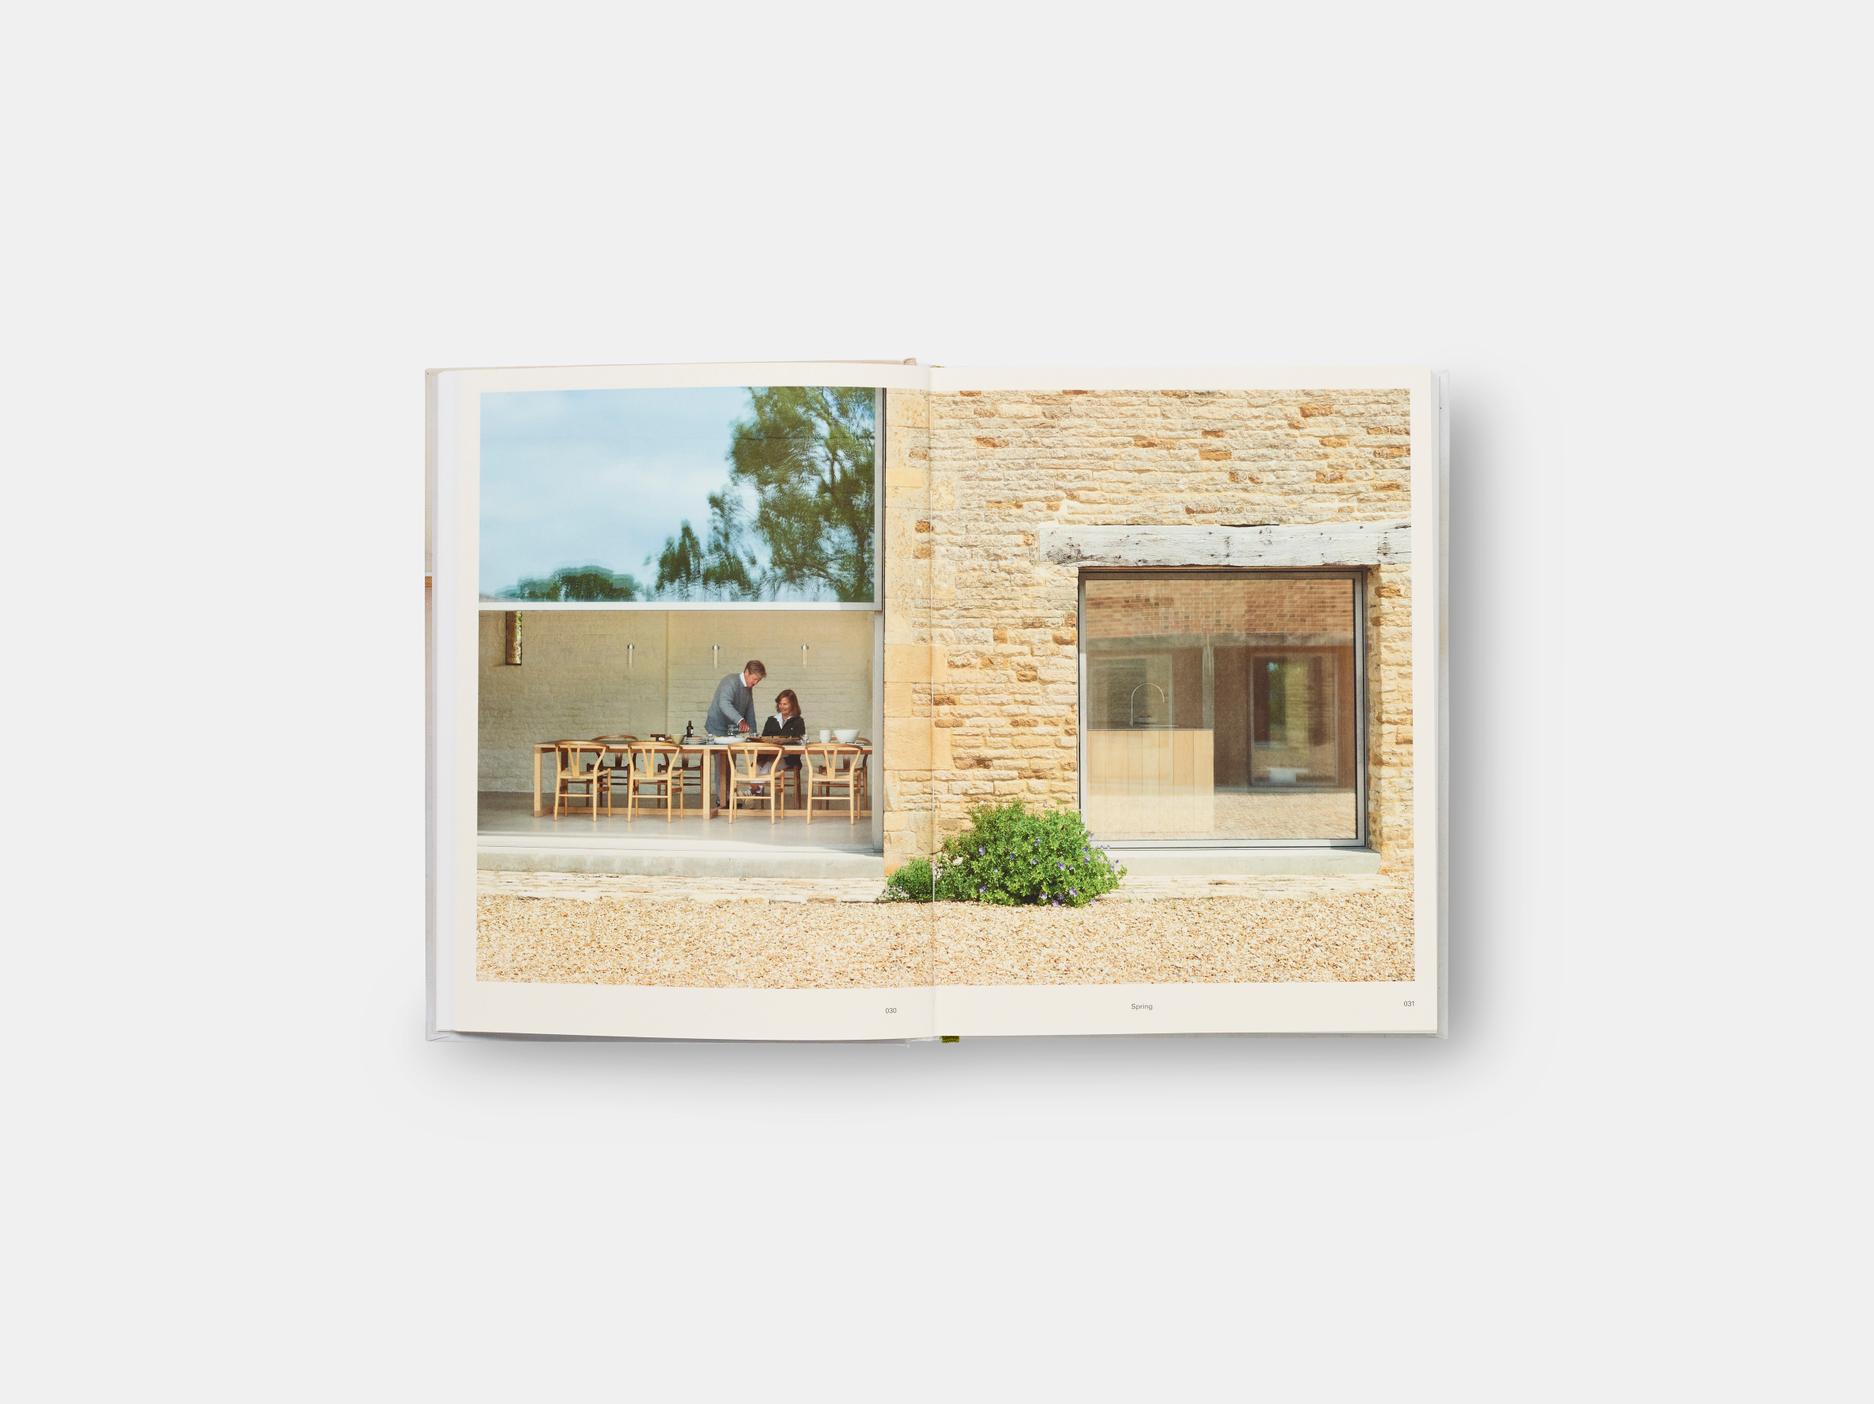 A long-awaited second cookbook from celebrated architectural designer John Pawson and his wife Catherine

Home Farm is the Pawson family's base in the heart of the English countryside. Five years in the making, the beautiful house was built to